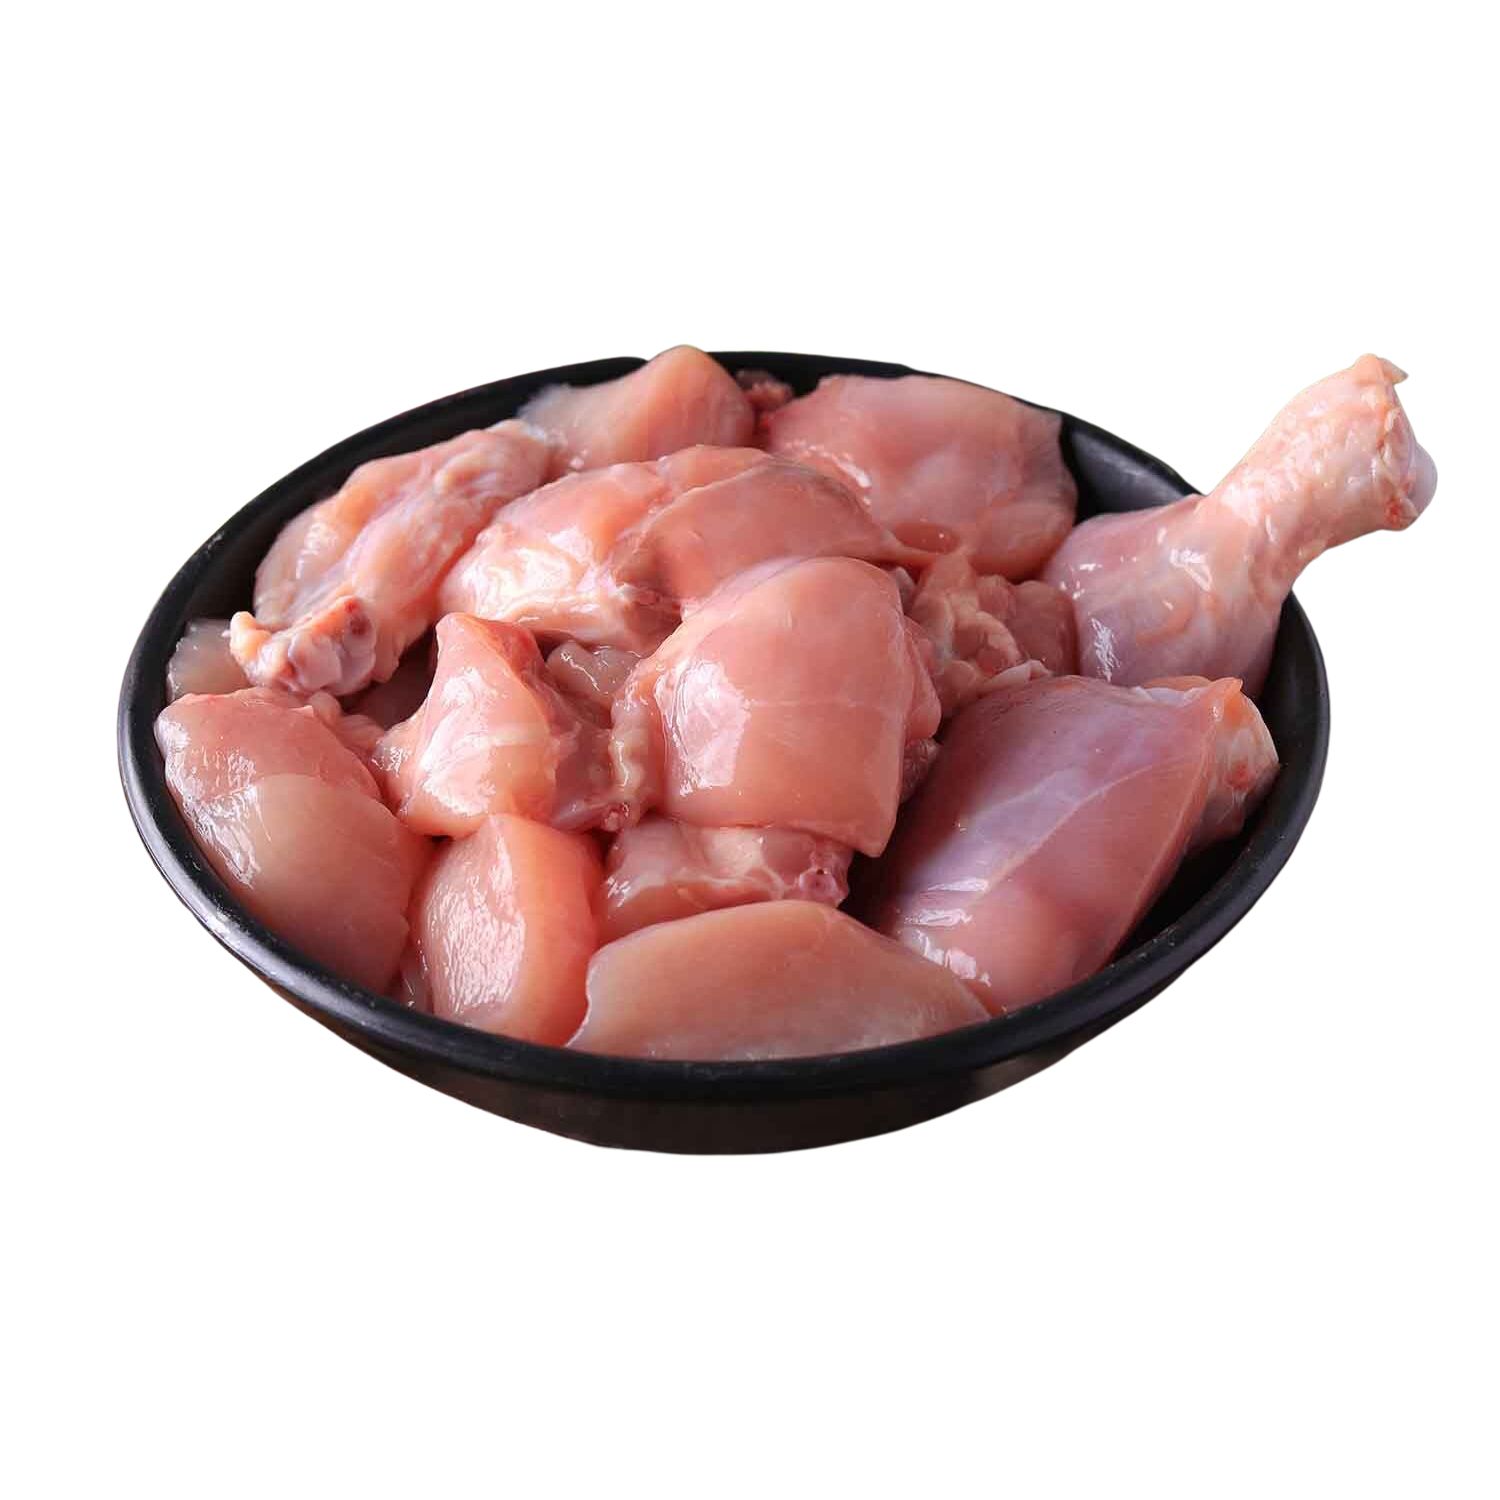 Chicken Curry Cut - Medium Pieces,Large Pack